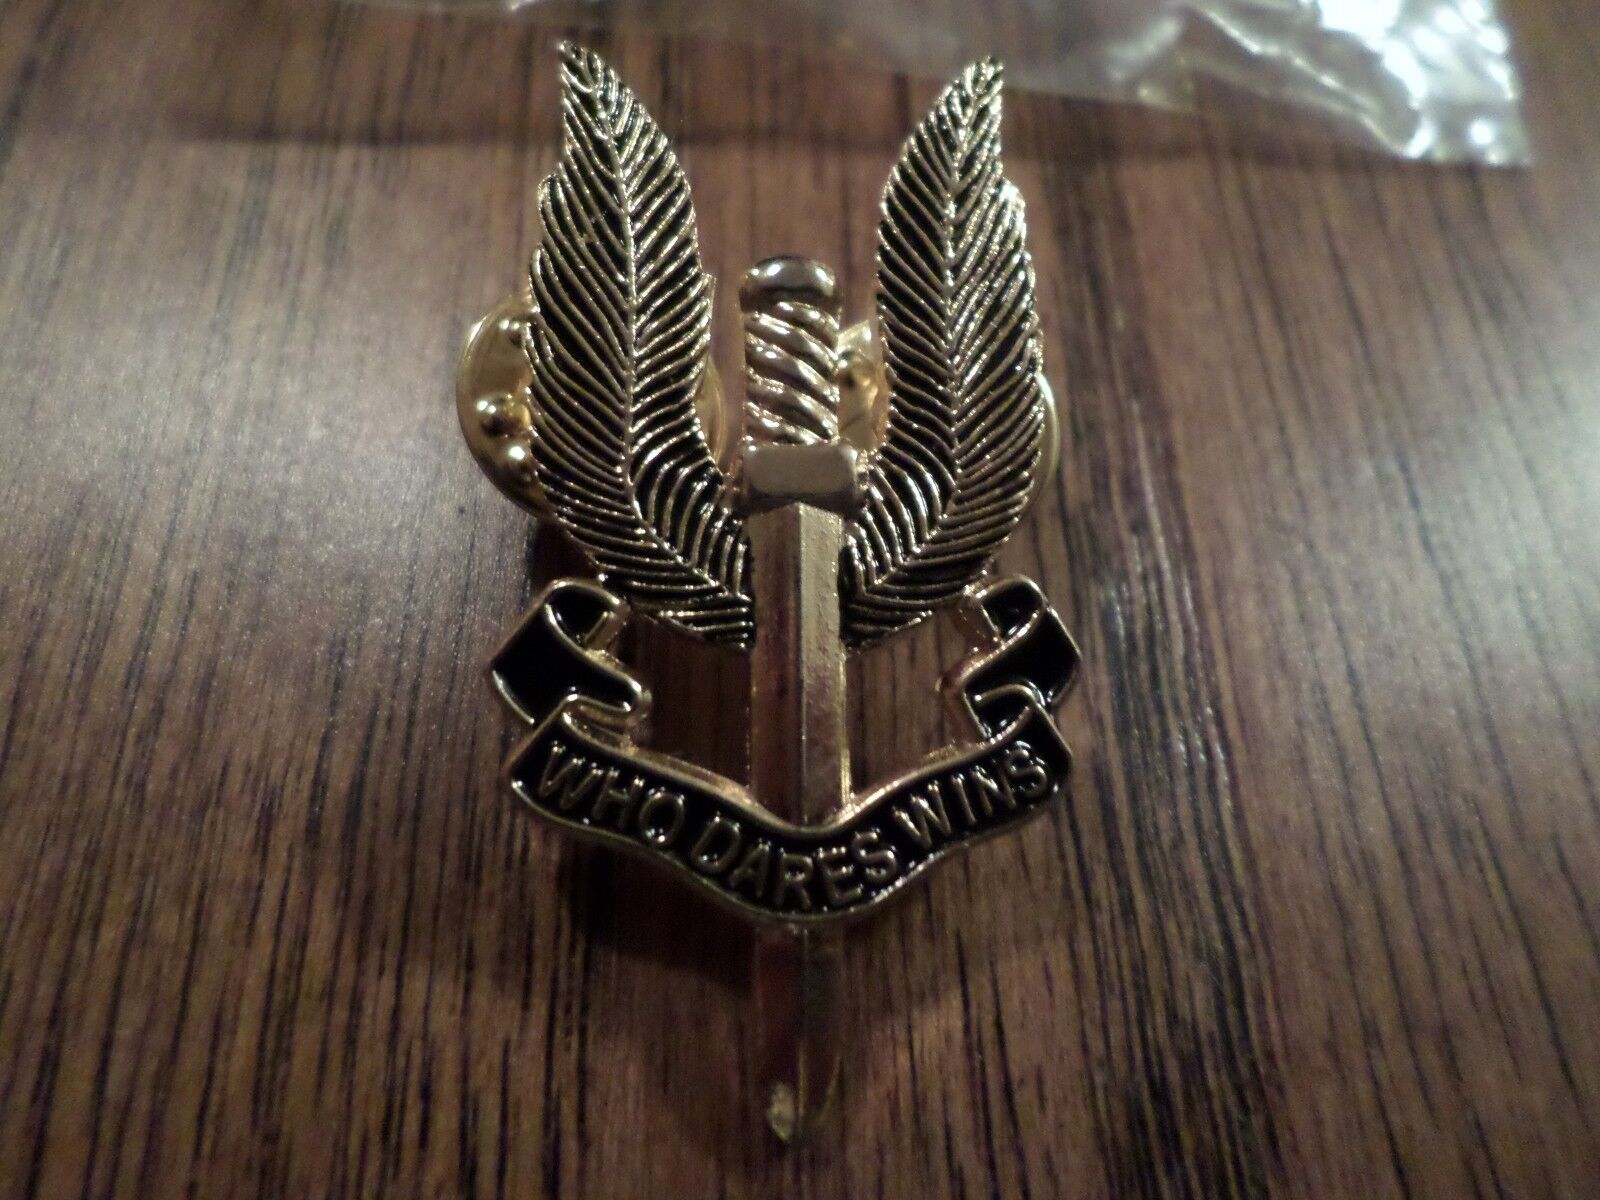 MILITARY SAS BRITISH SPECIAL FORCES HAT BERET PIN BADGE DOUBLE CLUTCH BACK 